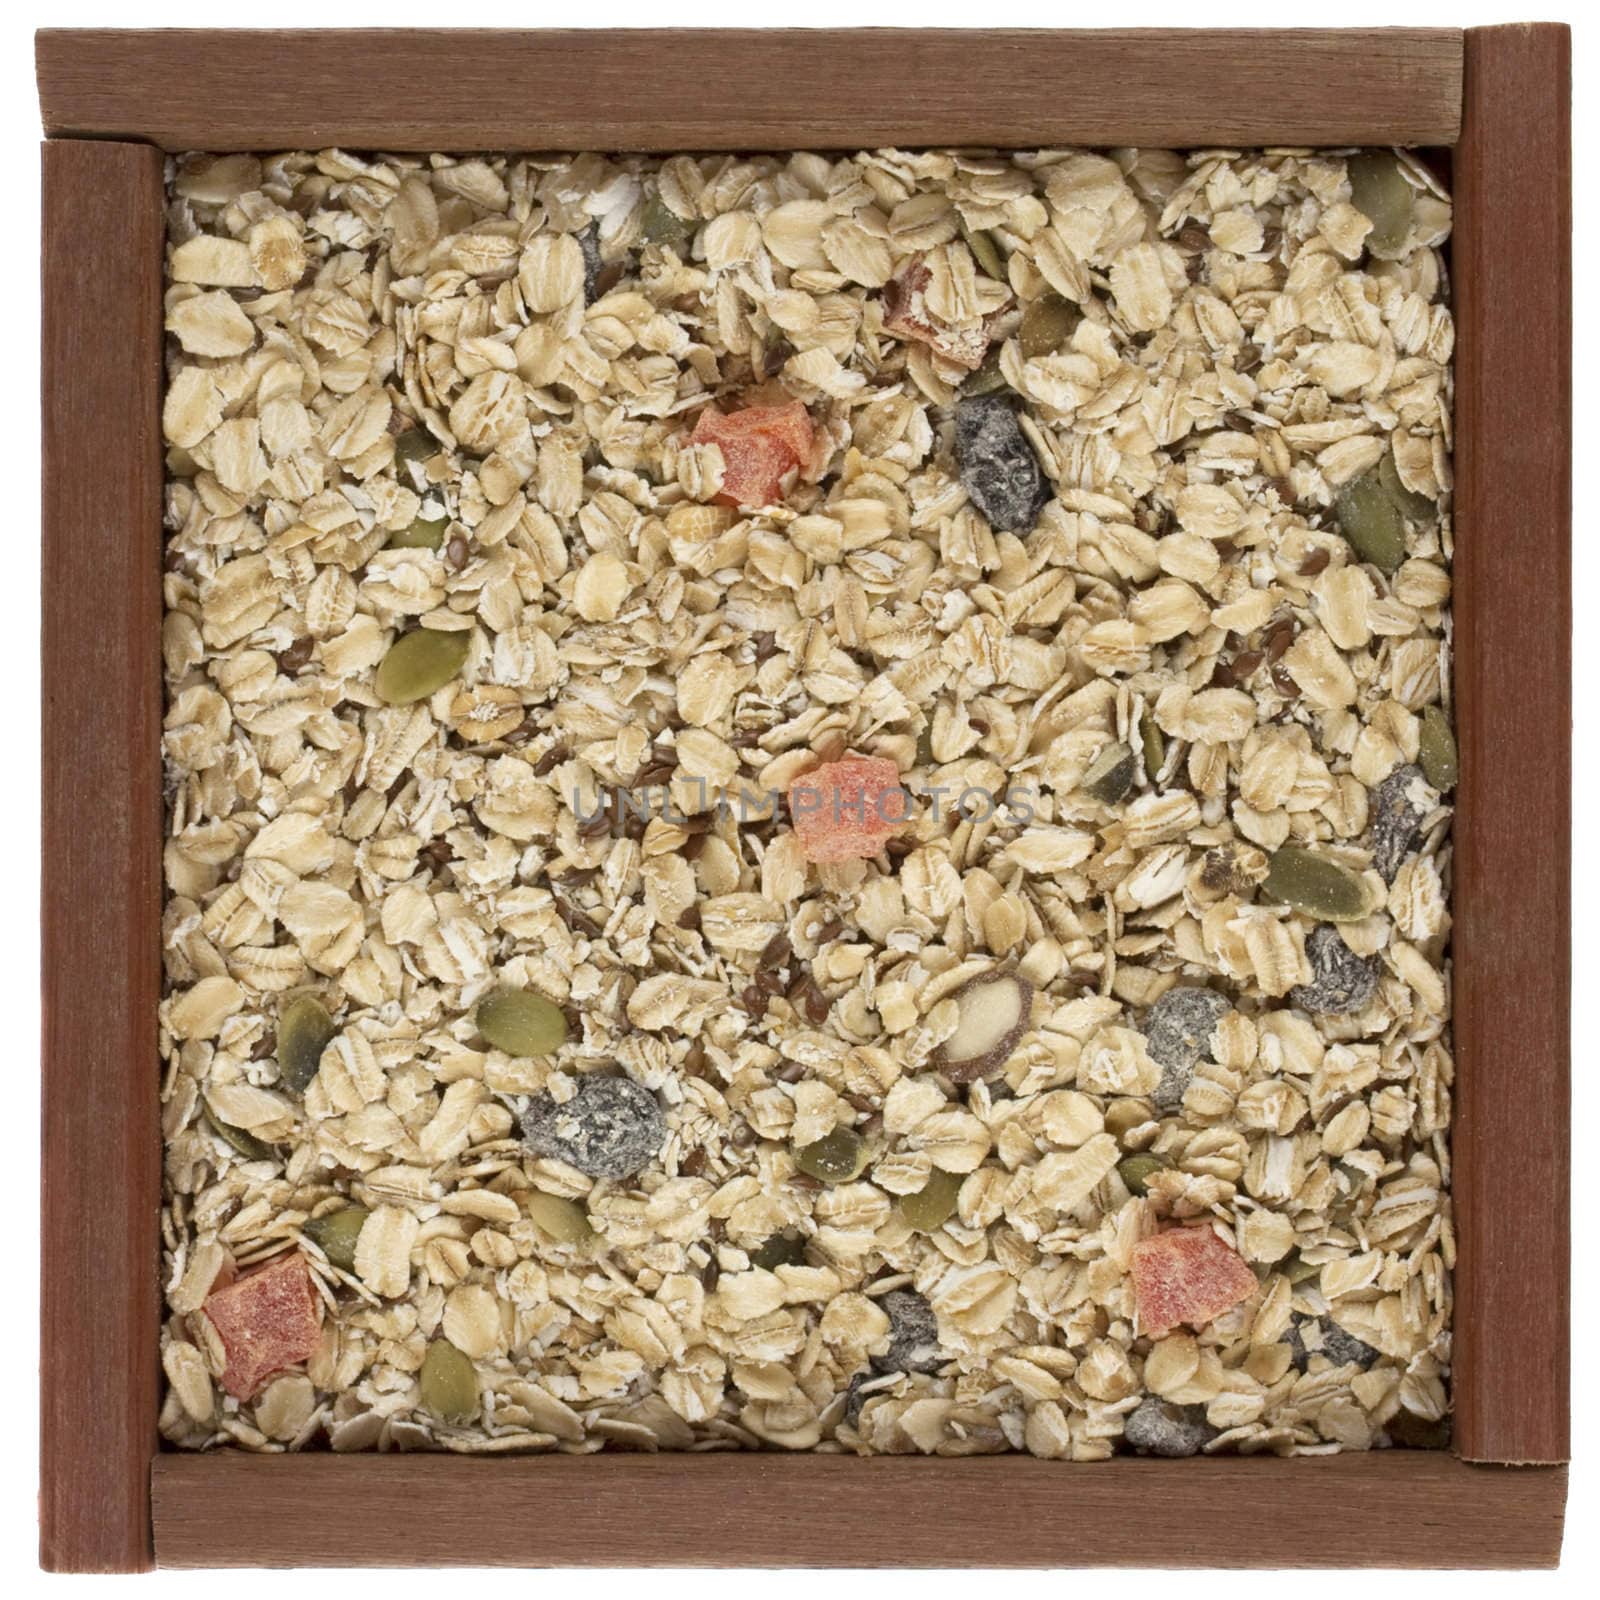 muesli cereal in a wooden box or frame - rolled oats with papaya fruit, pepita and raisins